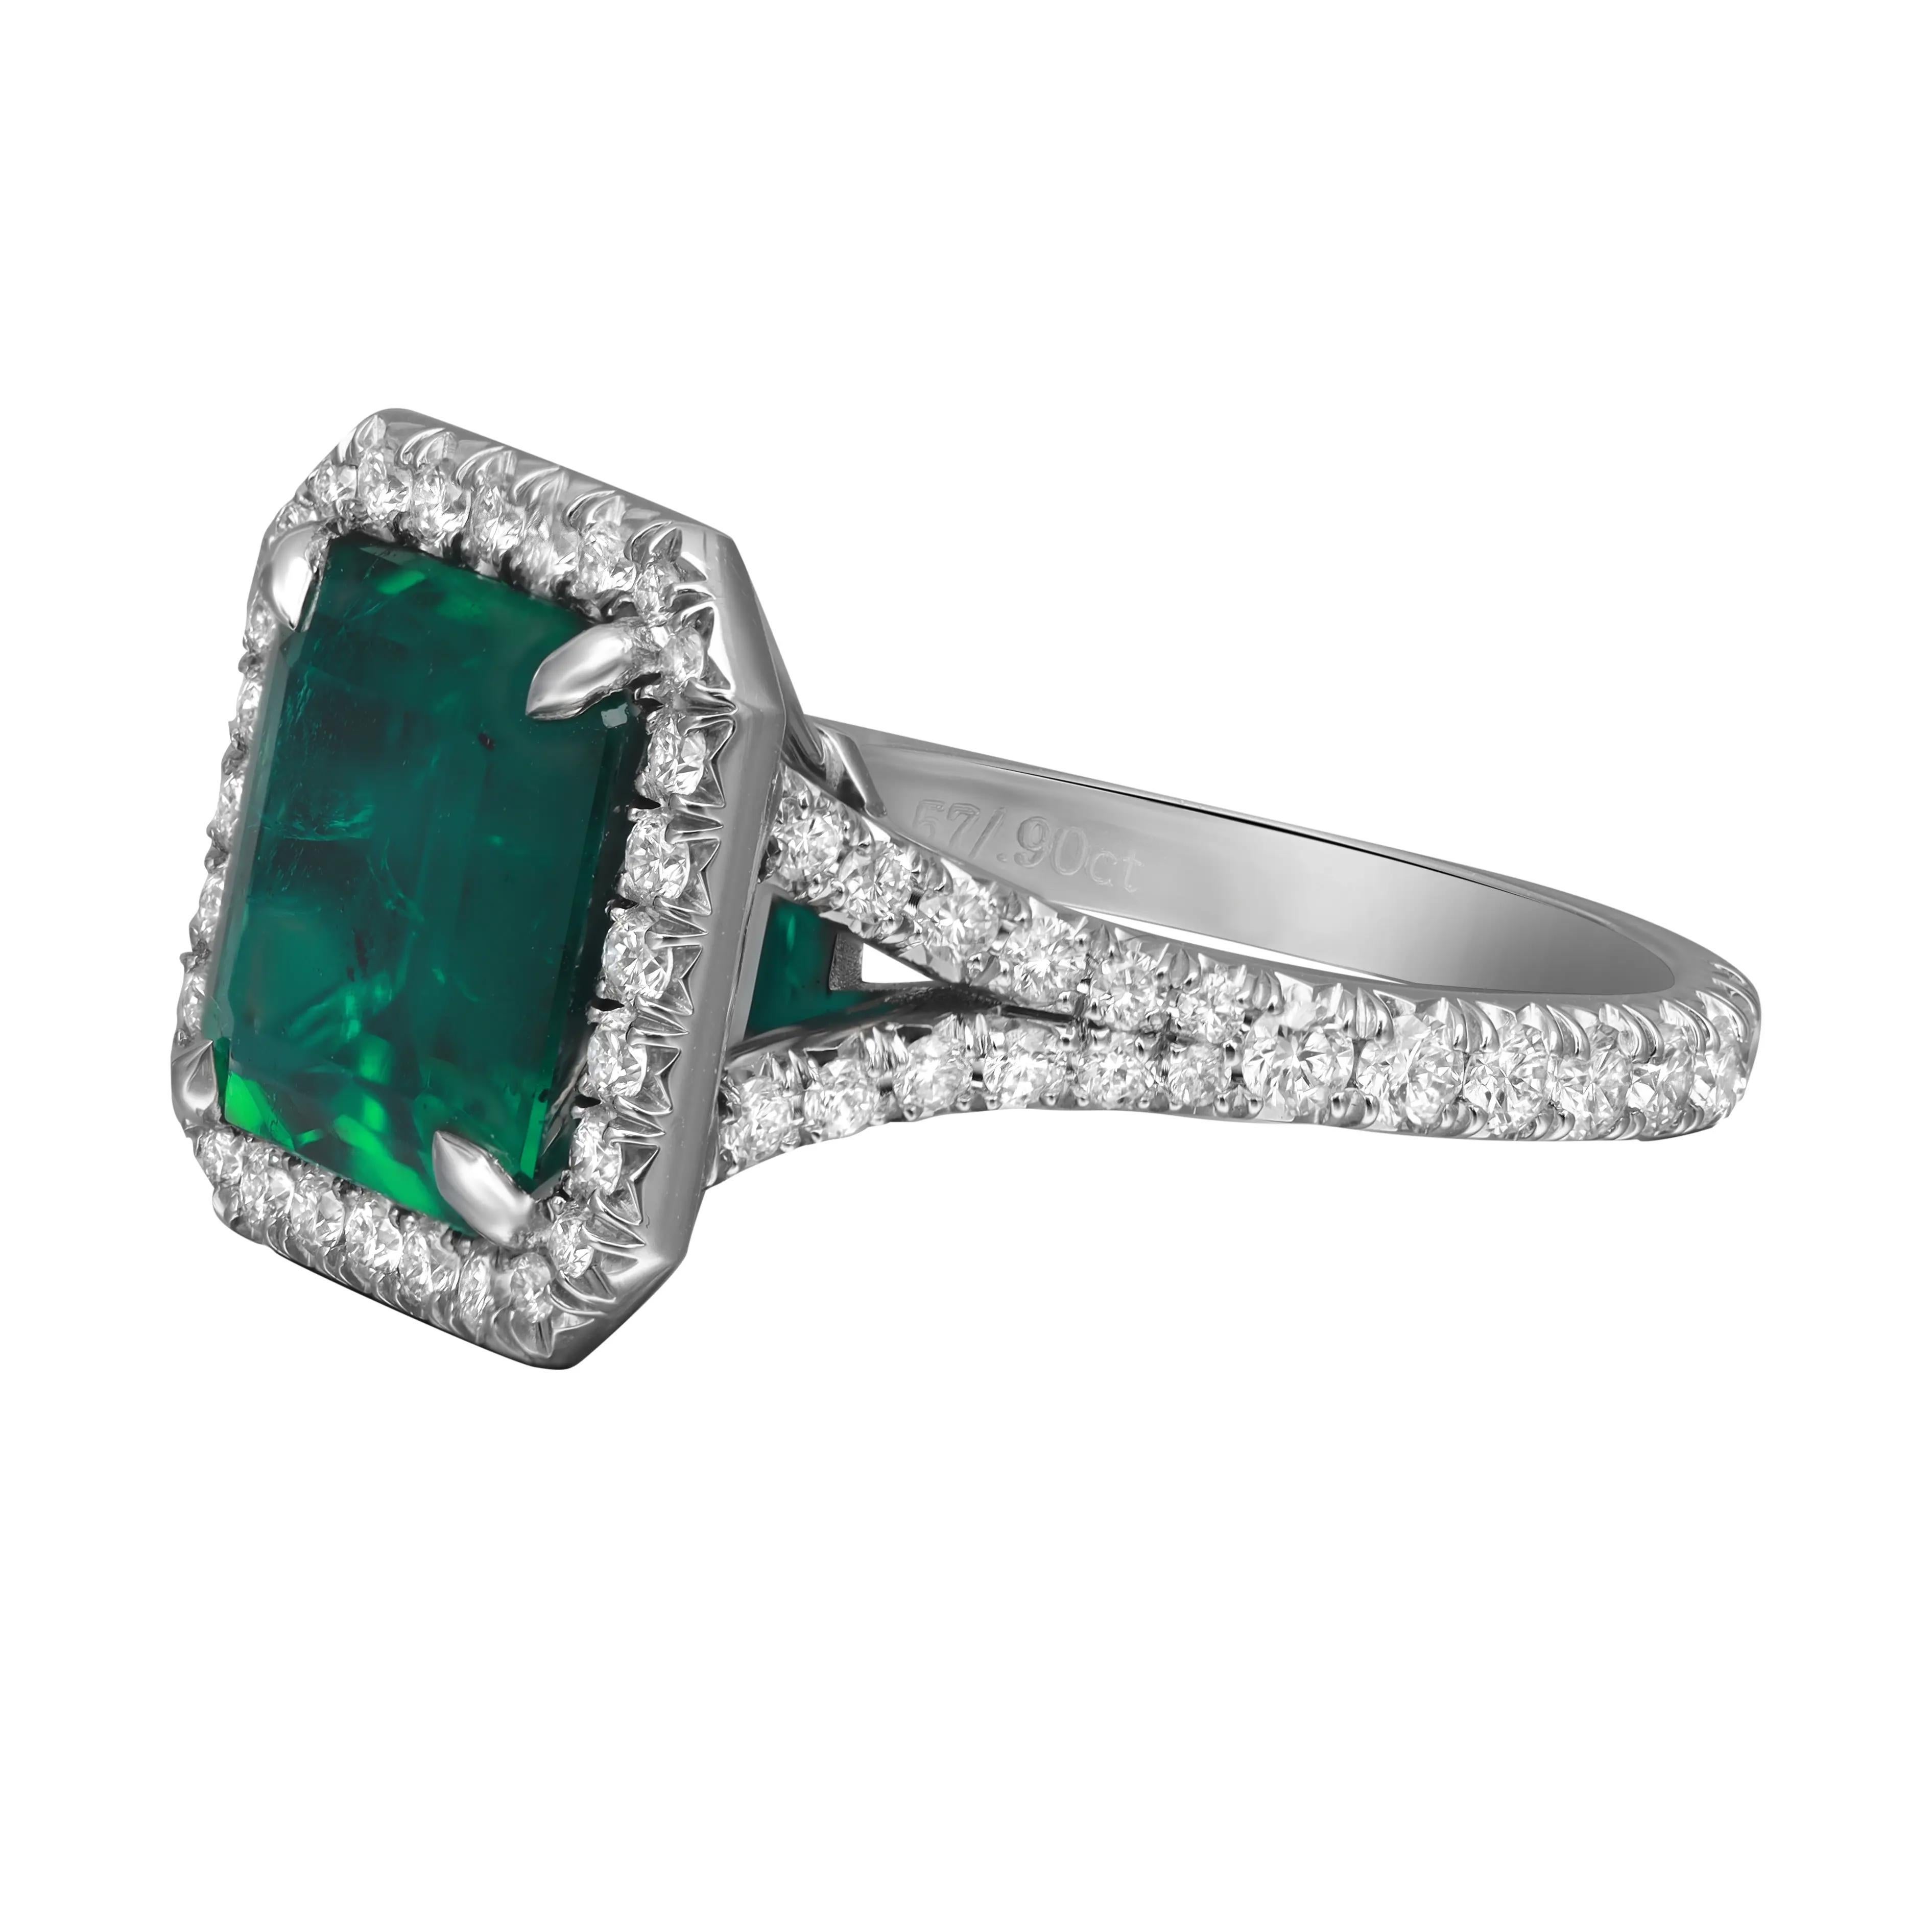 Modern 3.57cts Octagonal Zambian Green Emerald & Diamond Engagement Ring Platinum GIA For Sale